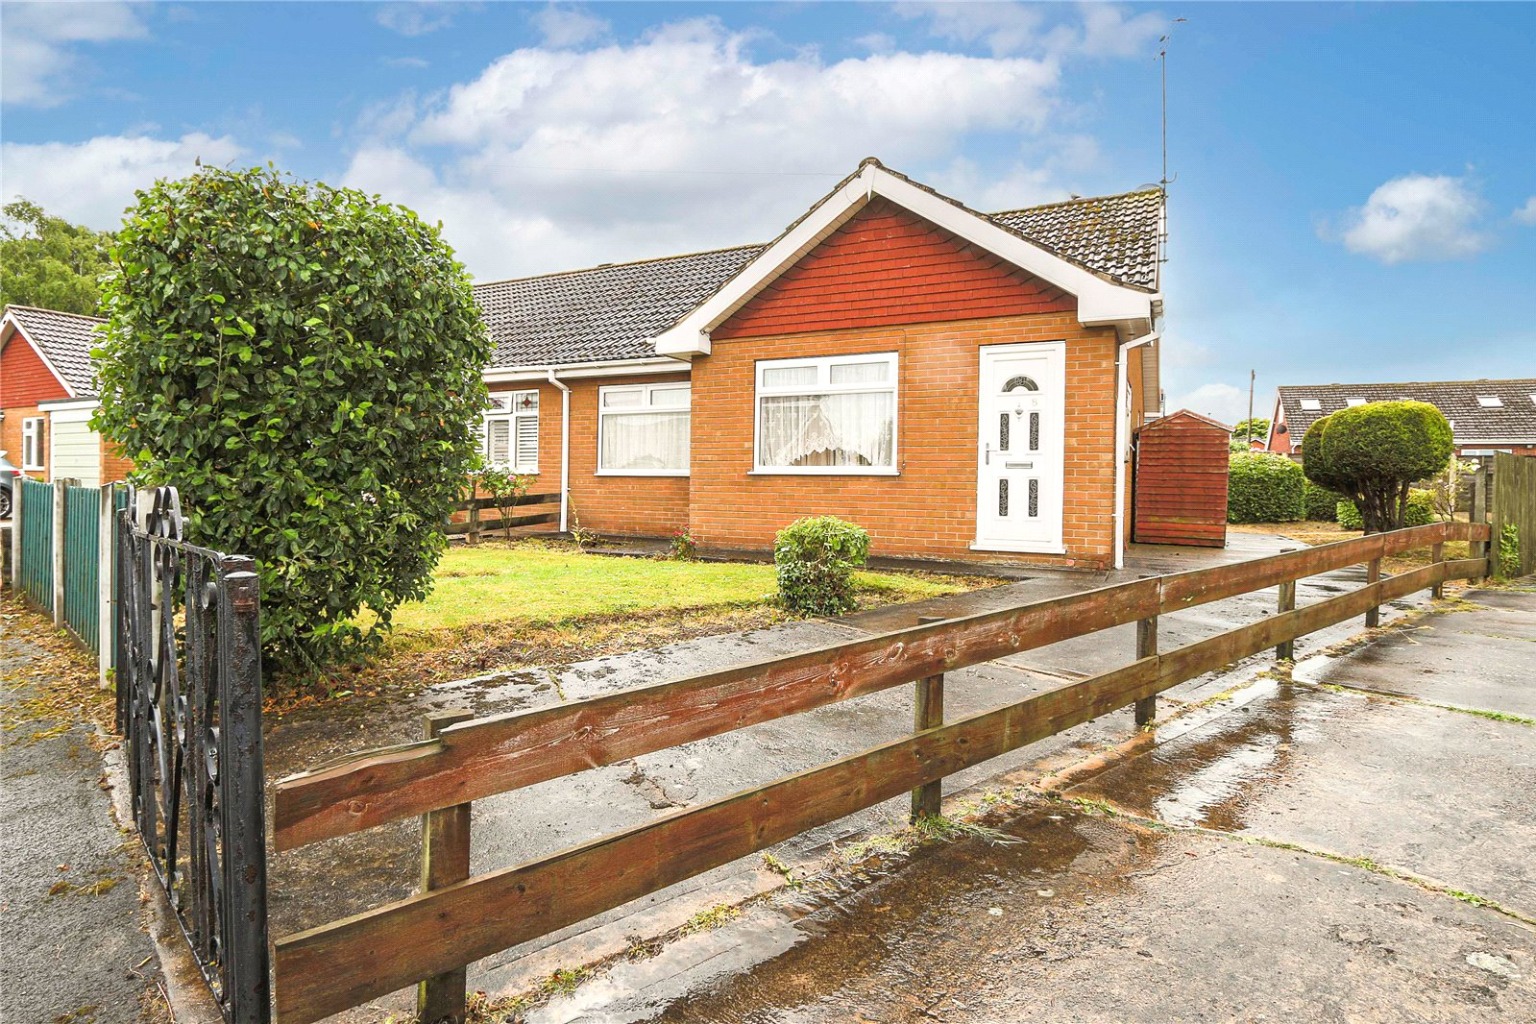 2 bed semi-detached bungalow for sale in Treece Gardens, Barton-Upon-Humber, DN18